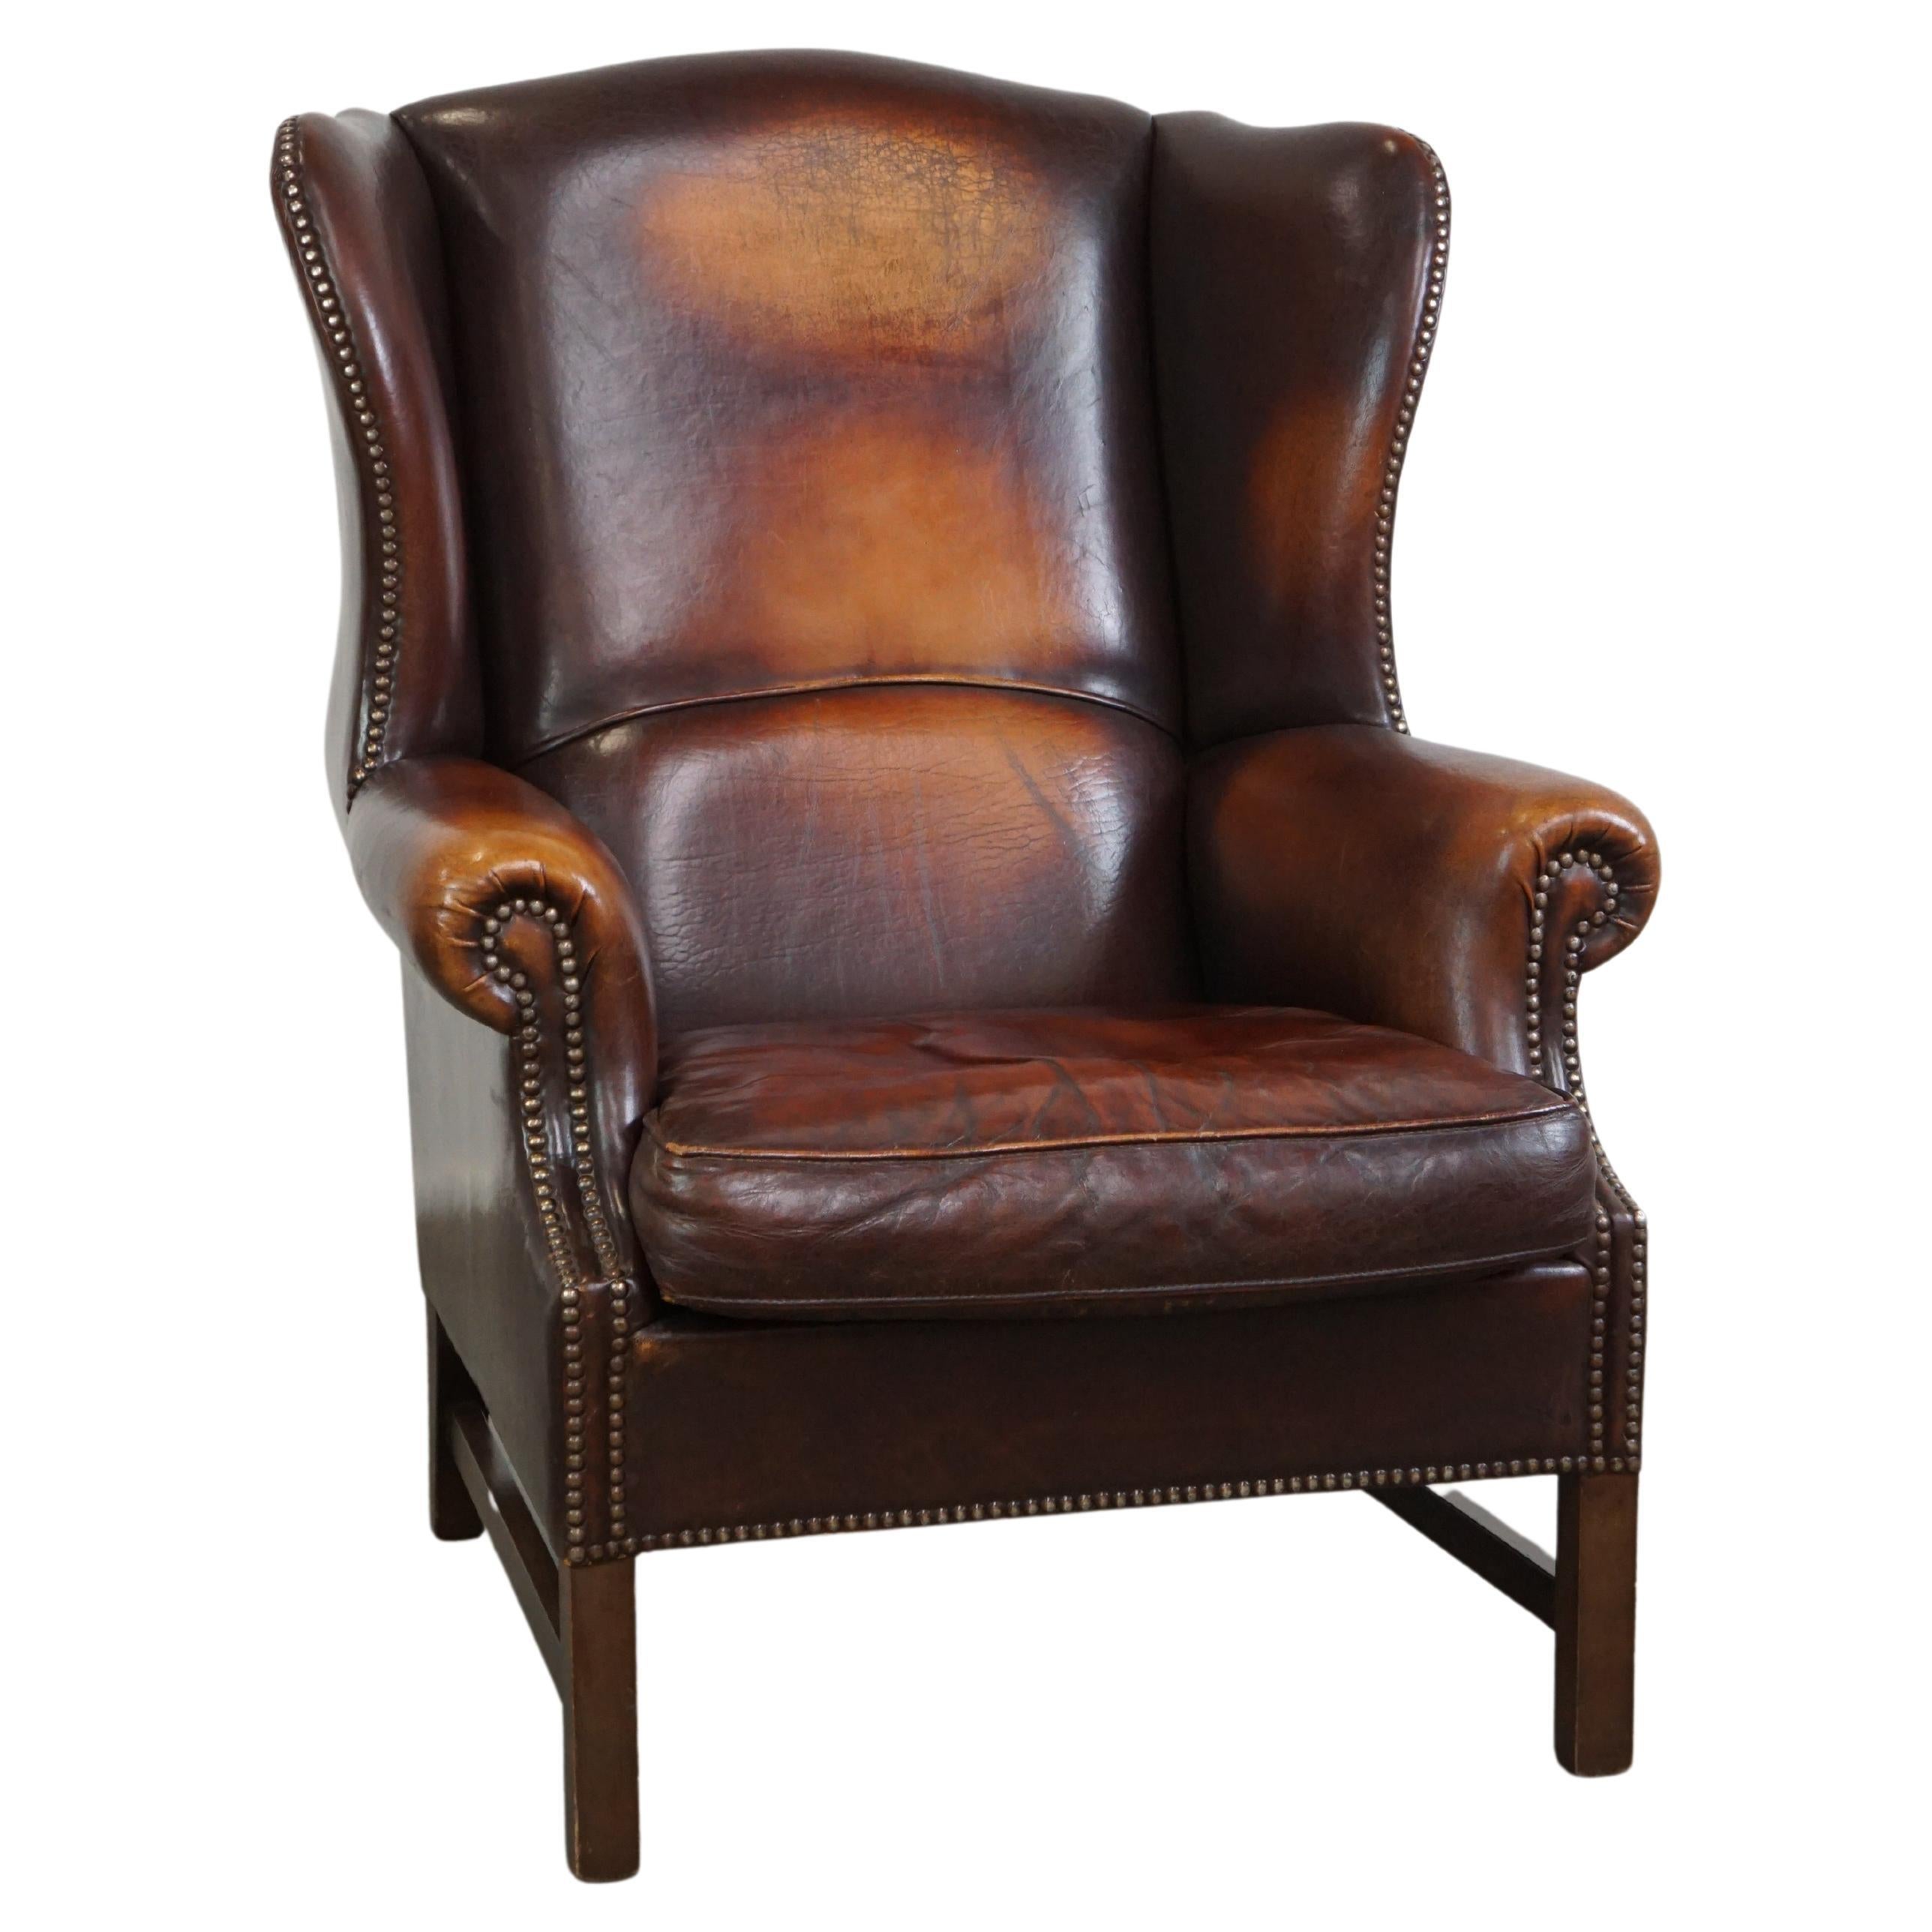 Beautiful classic and stately wingback armchair made of sheep leather with lovel